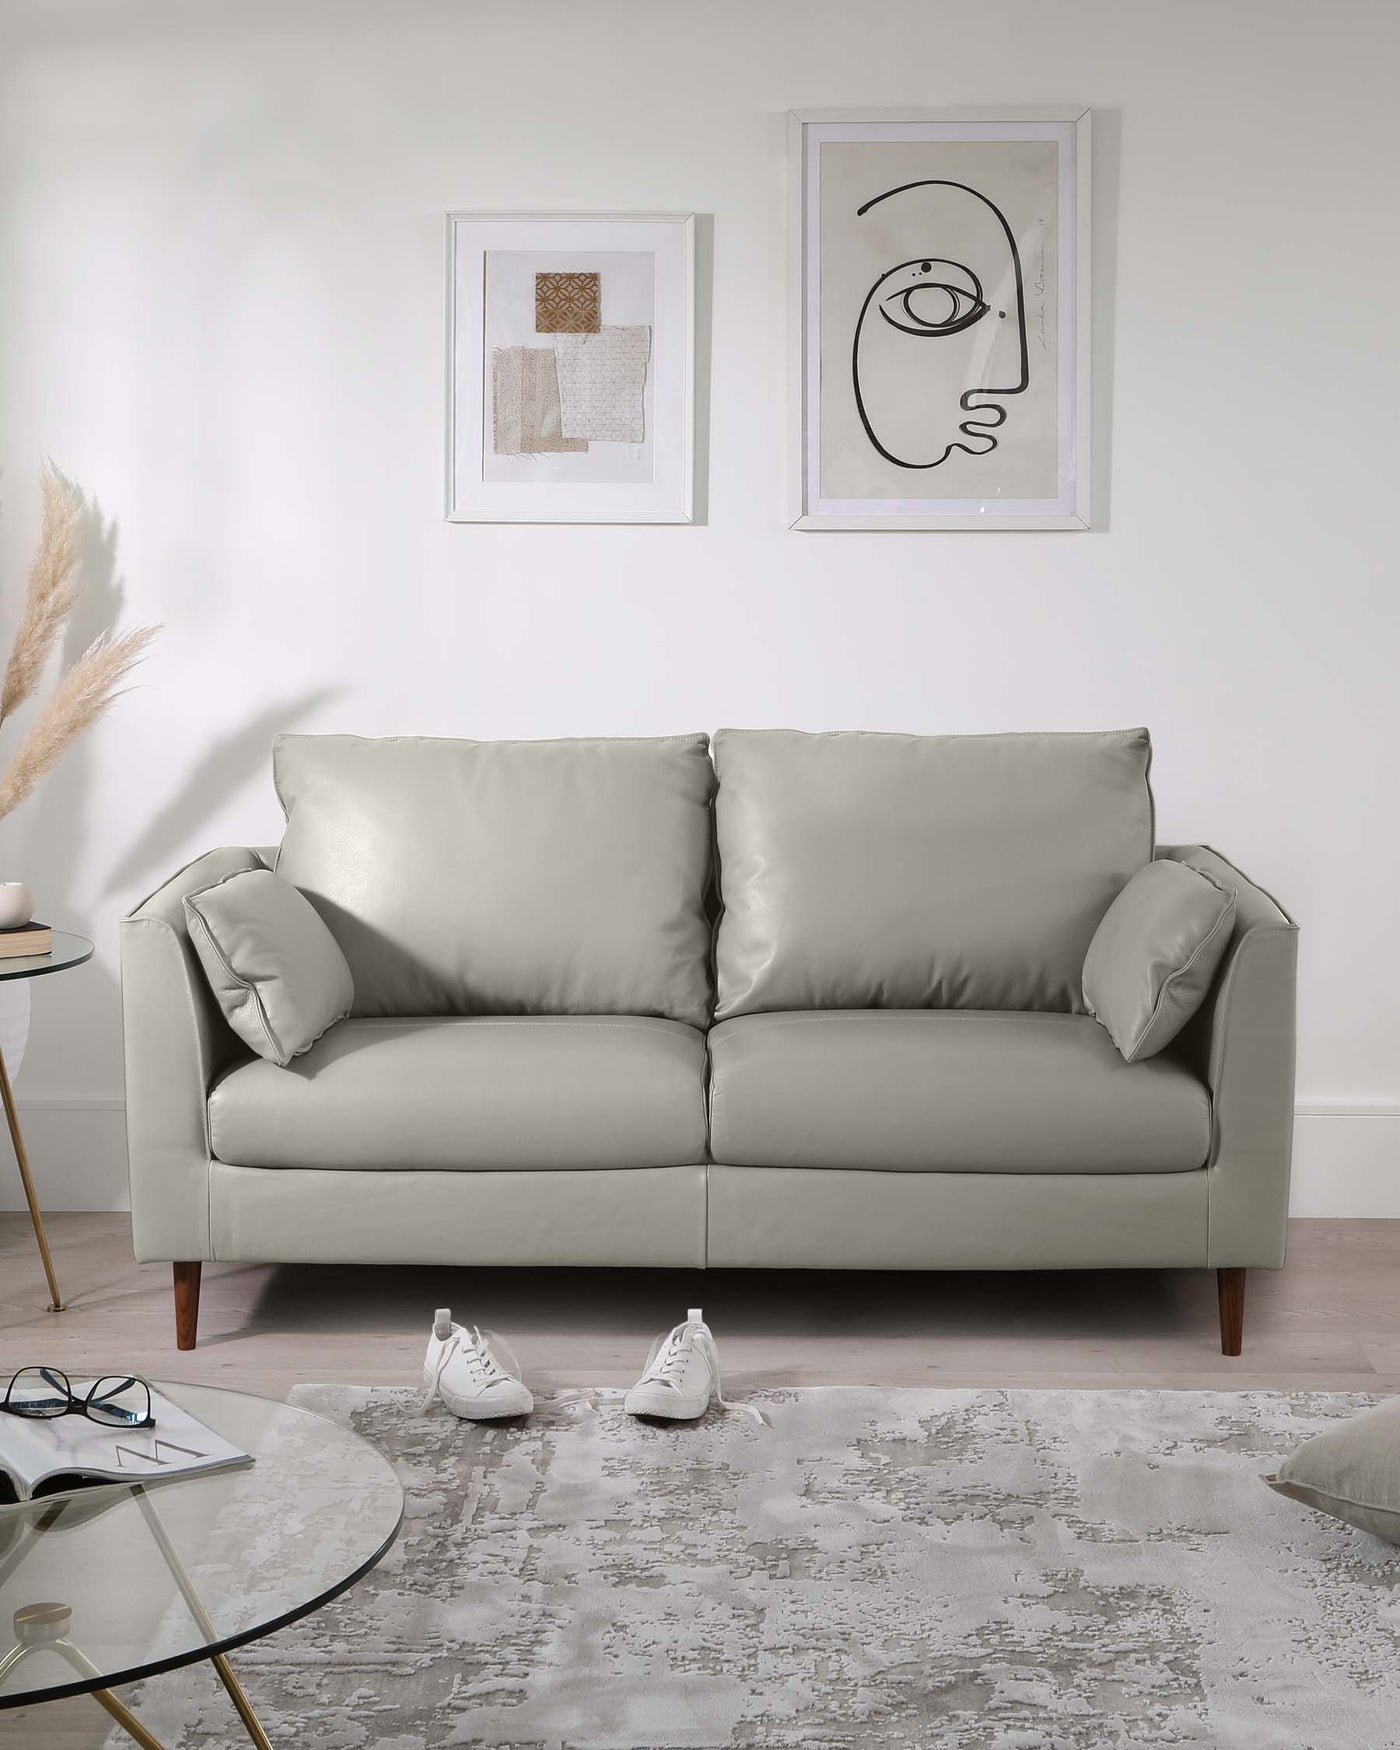 A modern light grey upholstered three-seater sofa with a minimalistic design and plush cushions. The sofa stands on four wooden legs in a mid-century style, positioned on a textured grey area rug near a round glass-top coffee table with a golden rim and black legs. Adjacent to the sofa is a small round side table with a white top and wooden legs displaying a decorative plant. The setting is enhanced by contemporary framed artwork hanging on the wall above the sofa.